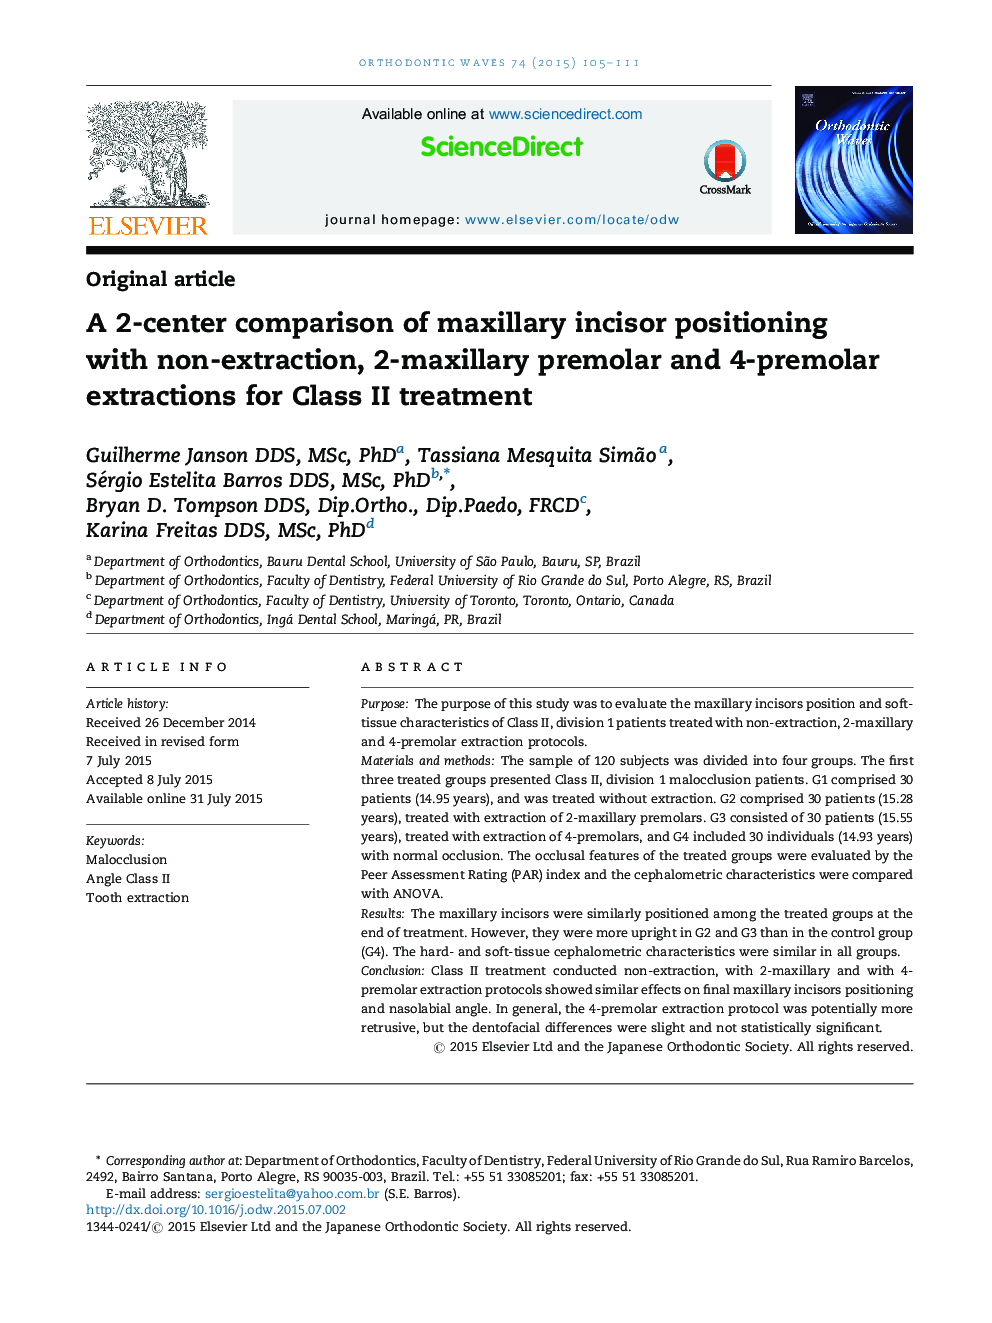 A 2-center comparison of maxillary incisor positioning with non-extraction, 2-maxillary premolar and 4-premolar extractions for Class II treatment